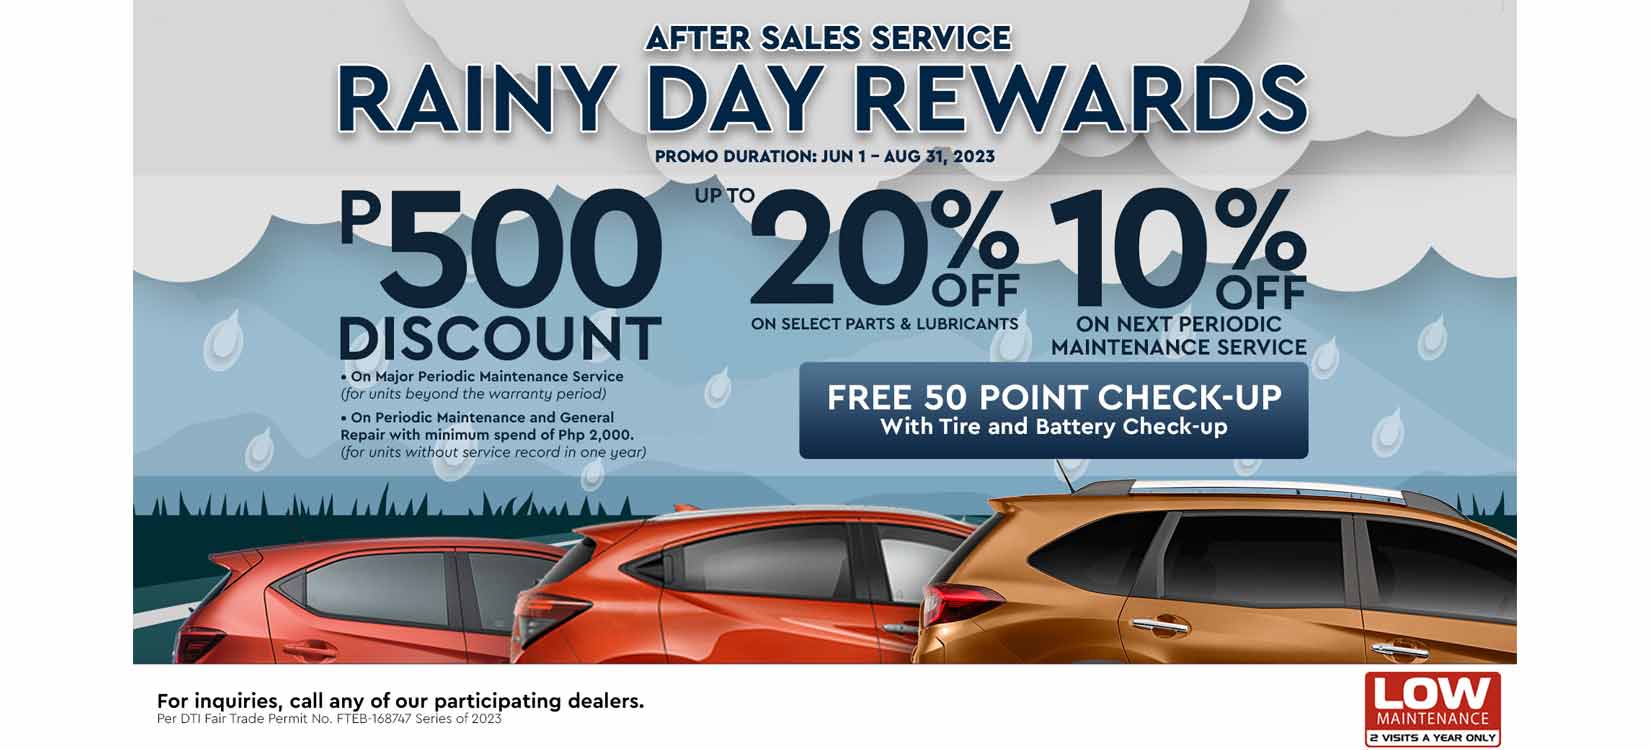 Honda Cars offers “Rainy Day Rewards” special after-sales deals